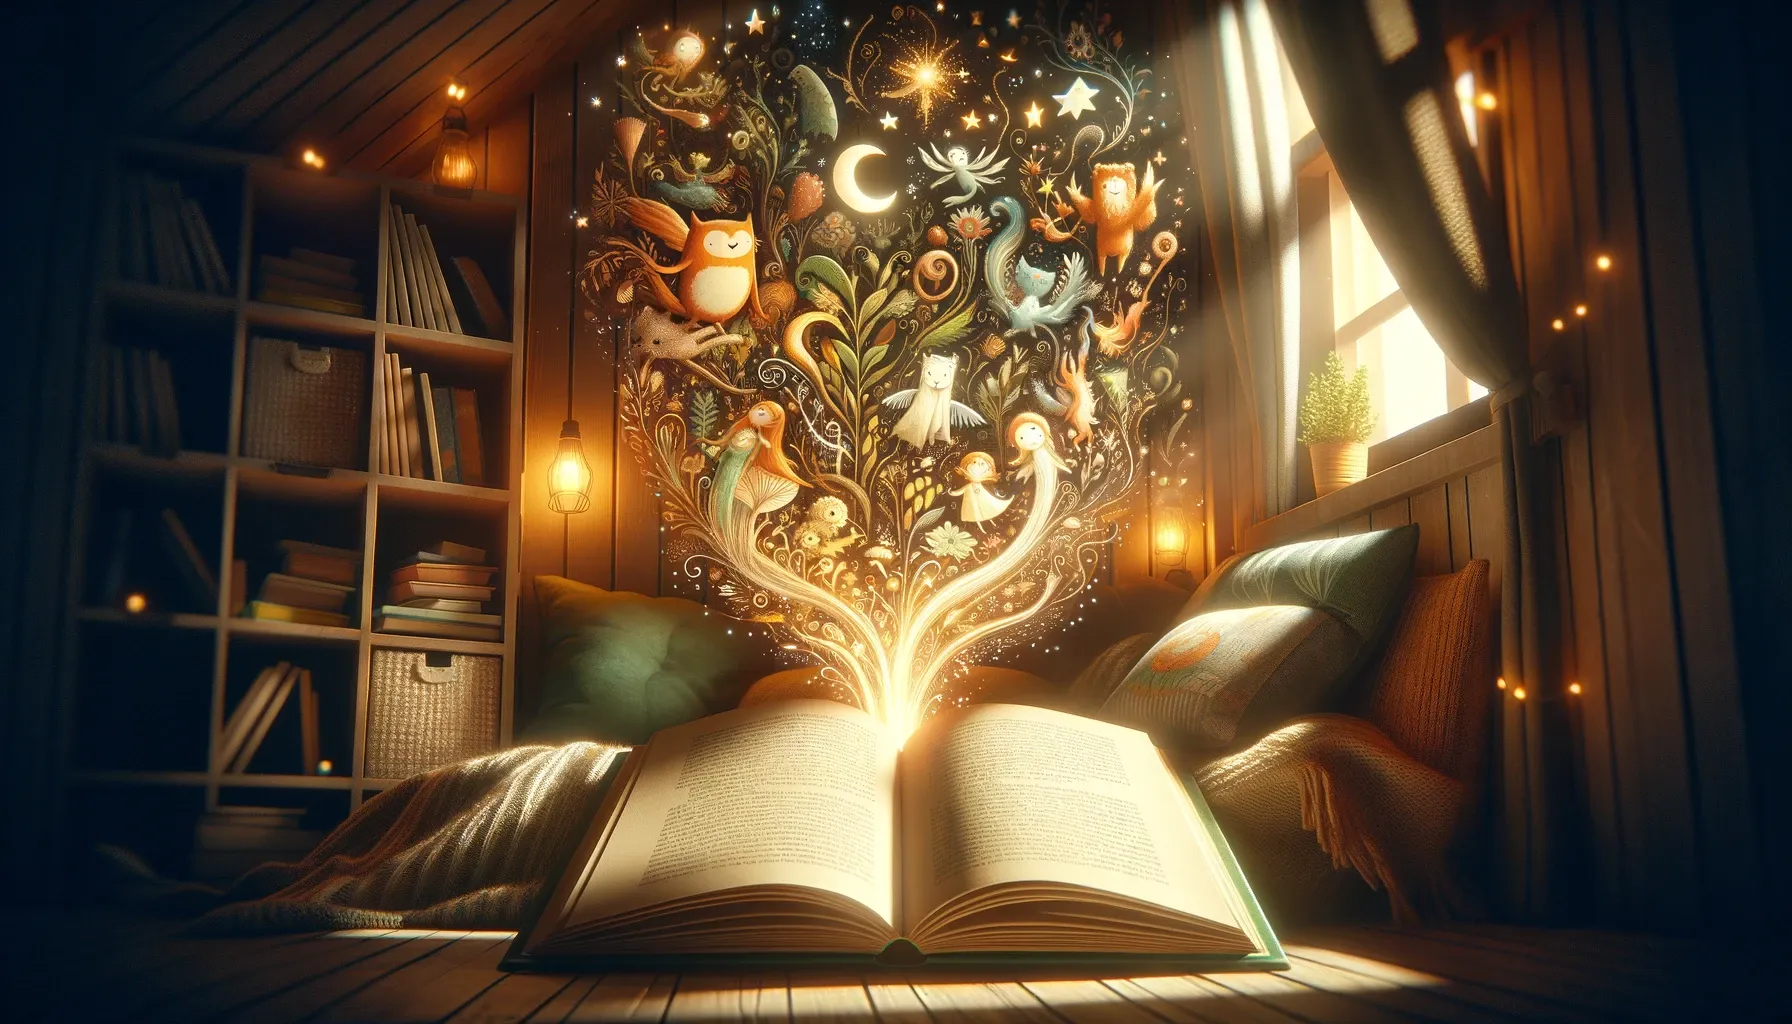 A cozy reading nook with an open children's book, from which whimsical illustrations spill out, creating a magical atmosphere.